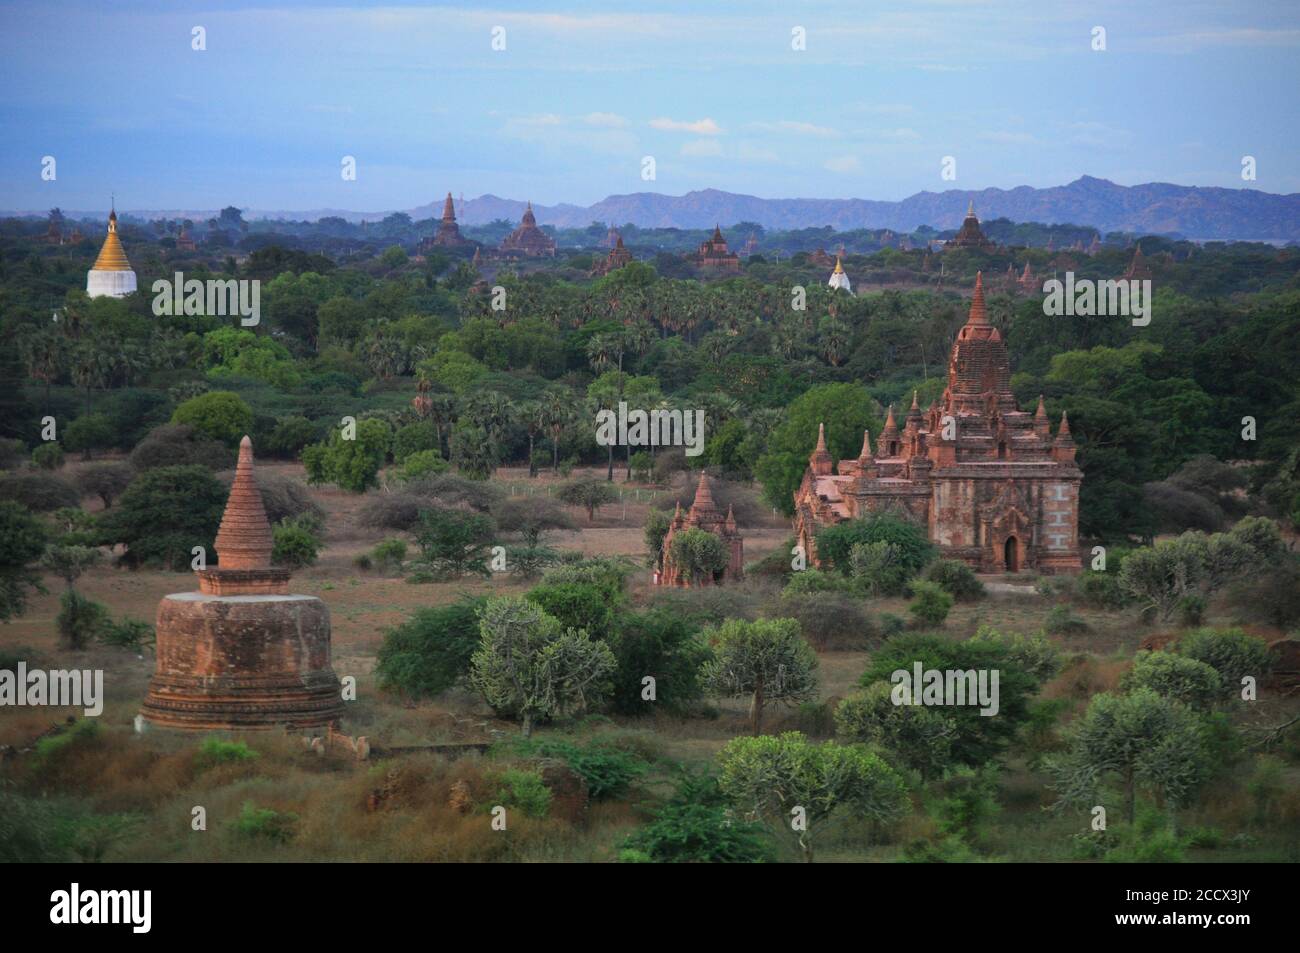 Old temples and pagodas in Bagan Myanmar with lush trees and greens Stock Photo